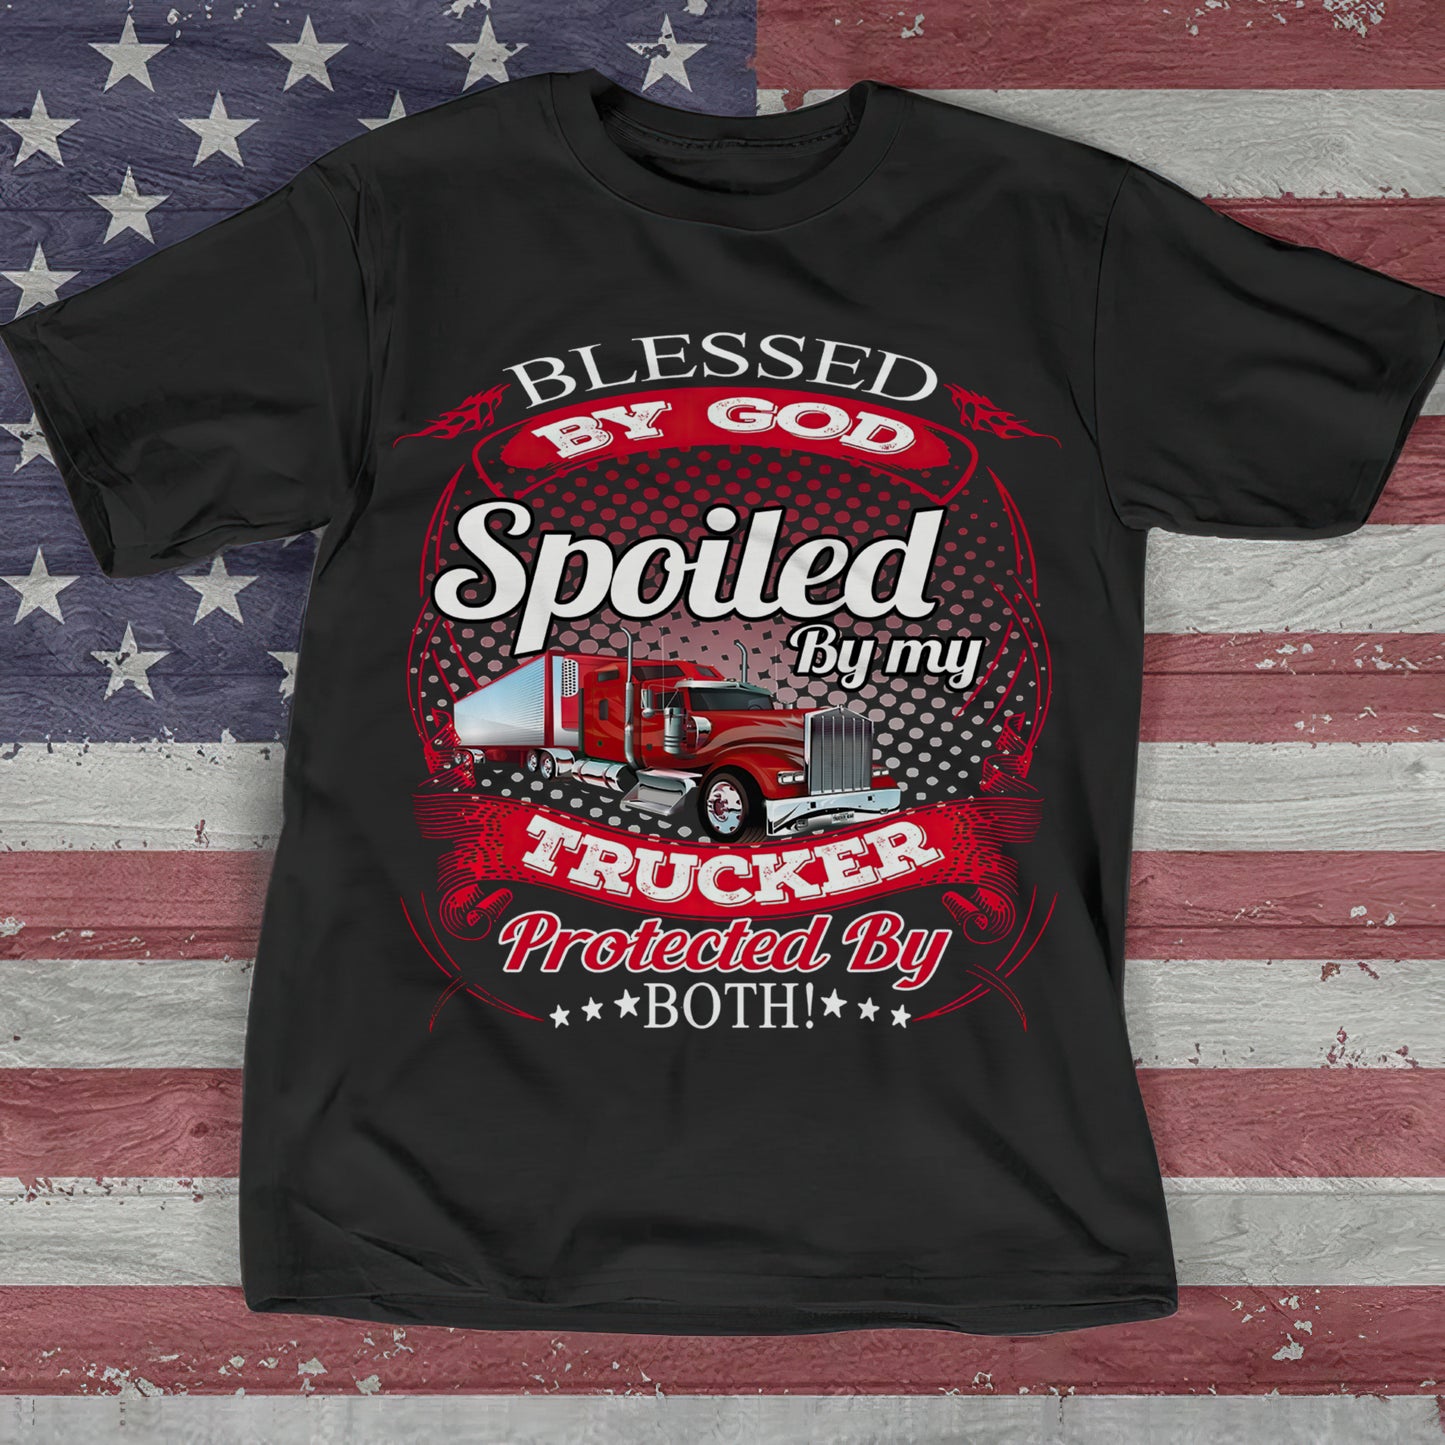 Blessed By God Spoiled By My Trucker T-Shirt - Truck Driver Gift - Trucker Shirt - Ciaocustom